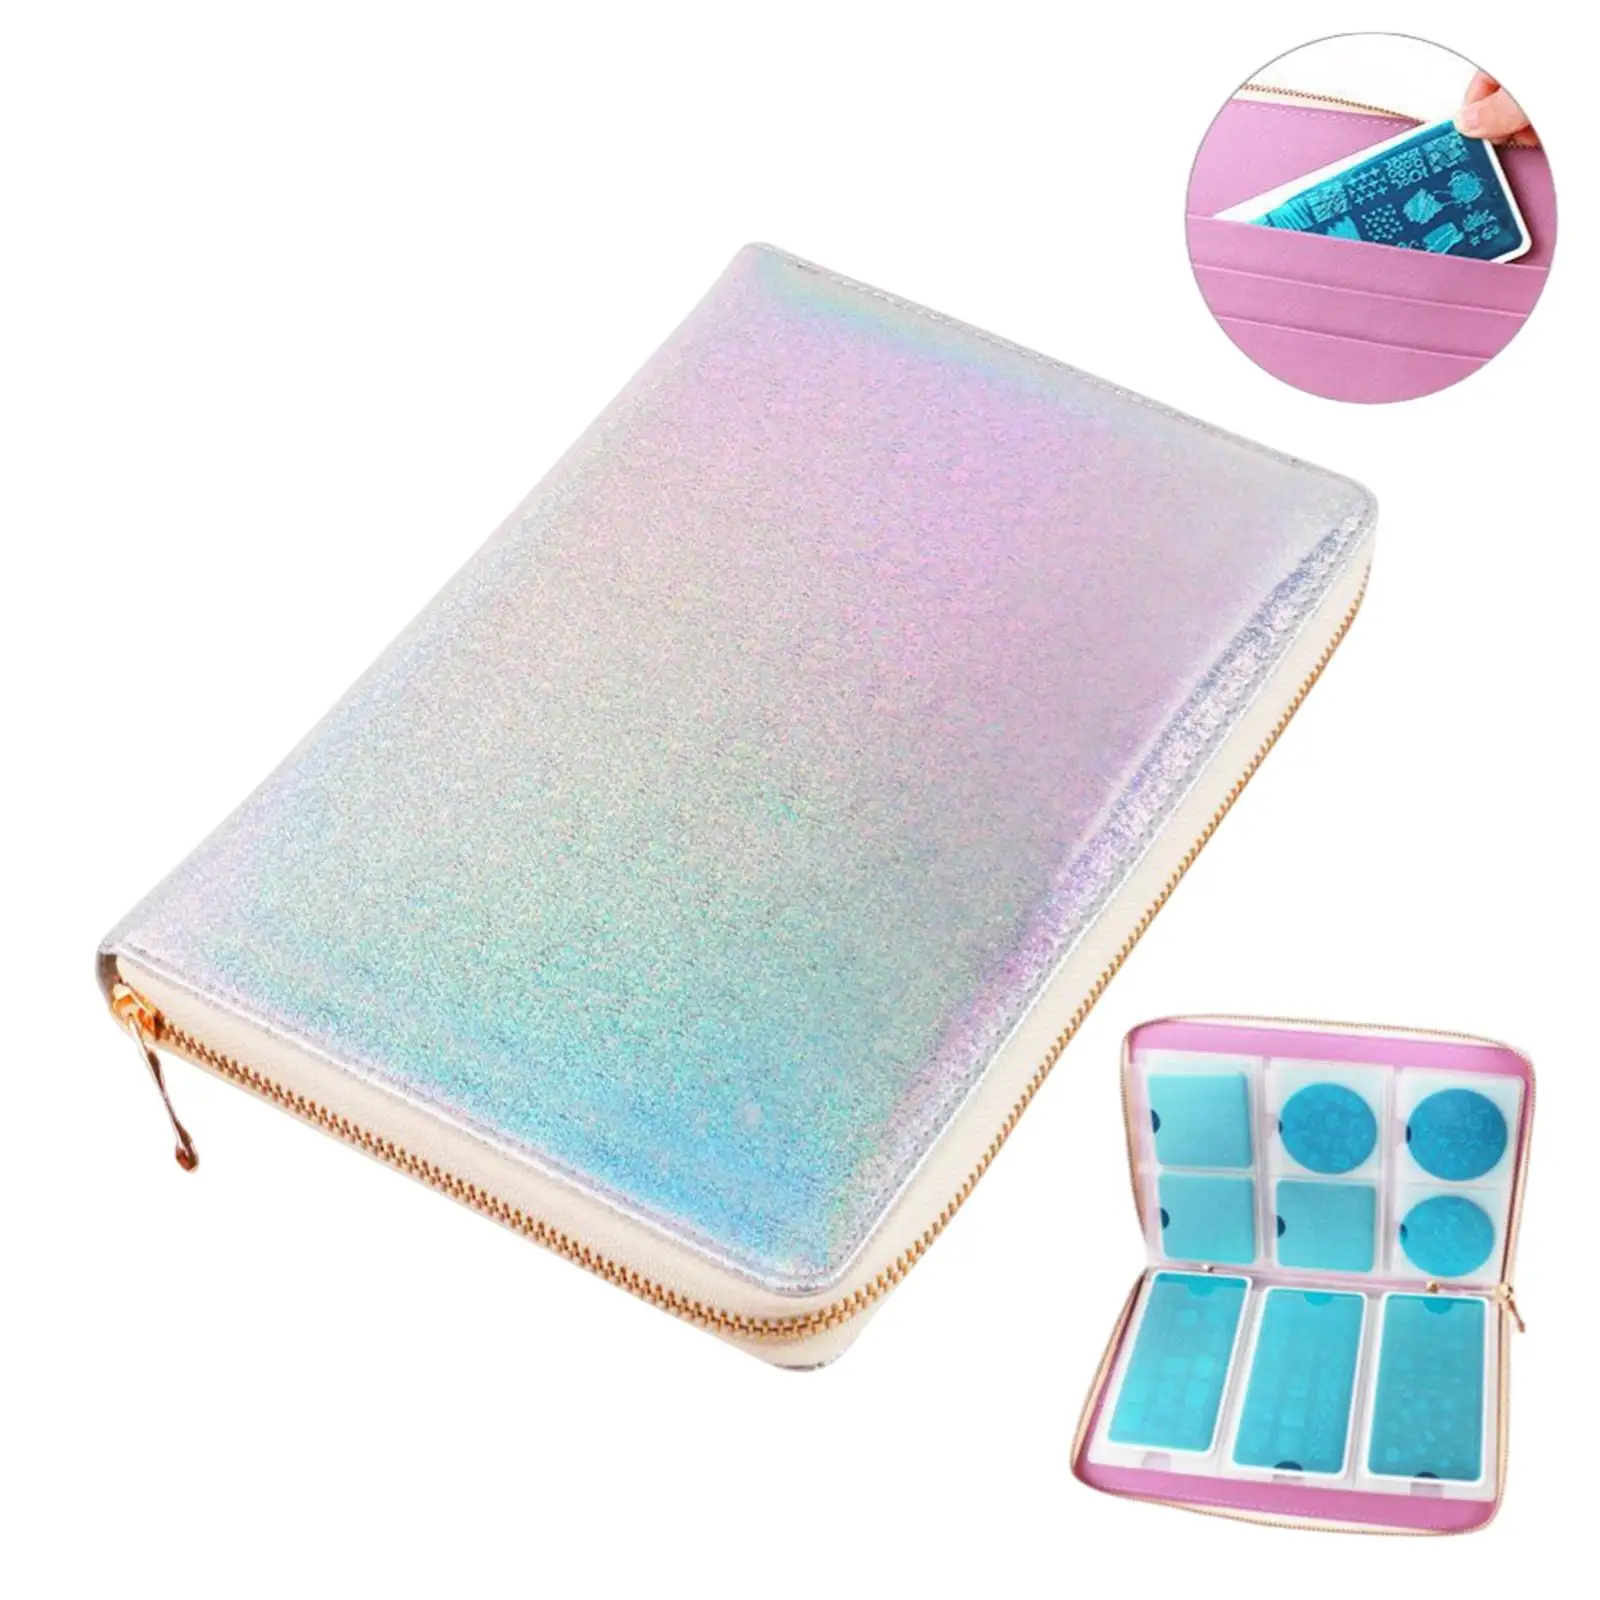 Nail Template Case Style Snap Close Rectangular Bag Printing Molds Collection Storage for Nail Art Plates Accessories